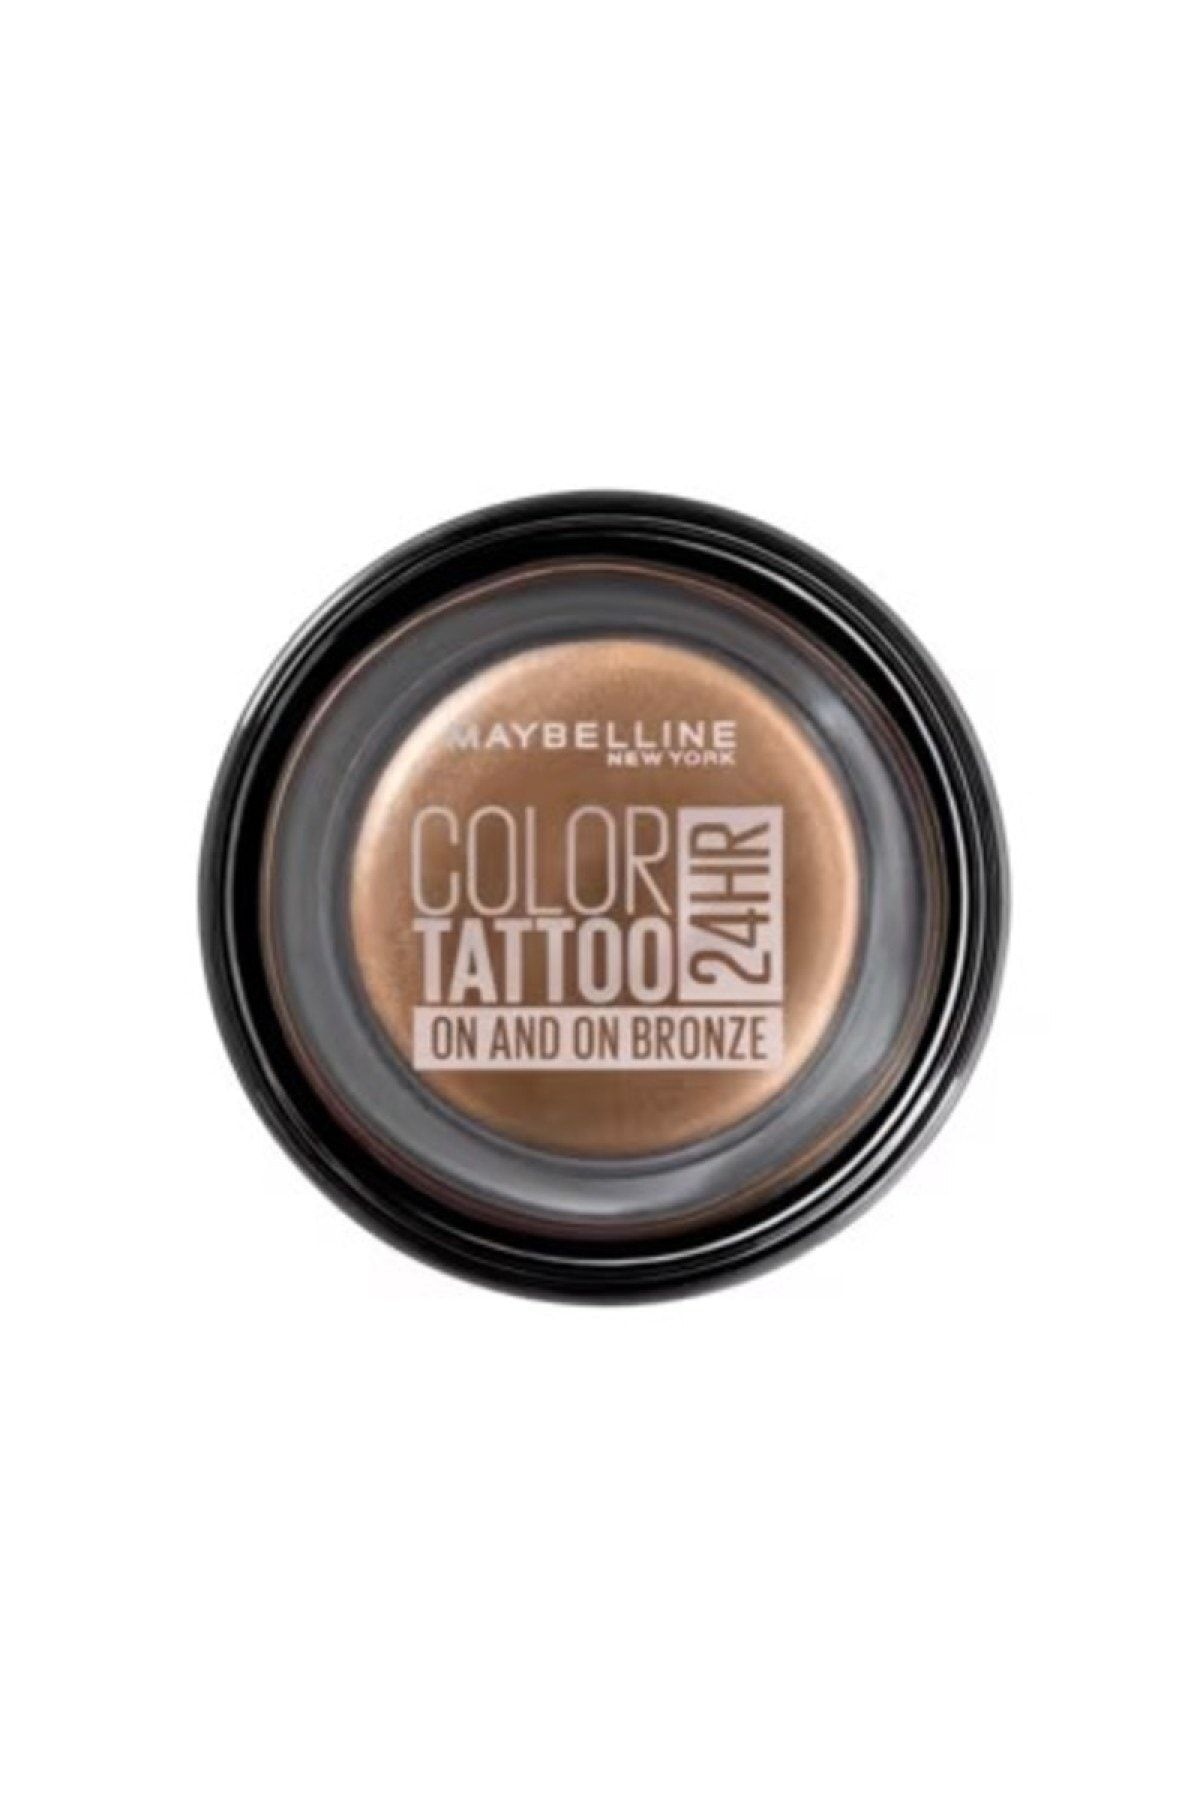 Maybelline New York 24h Far 35 On And On Bronze